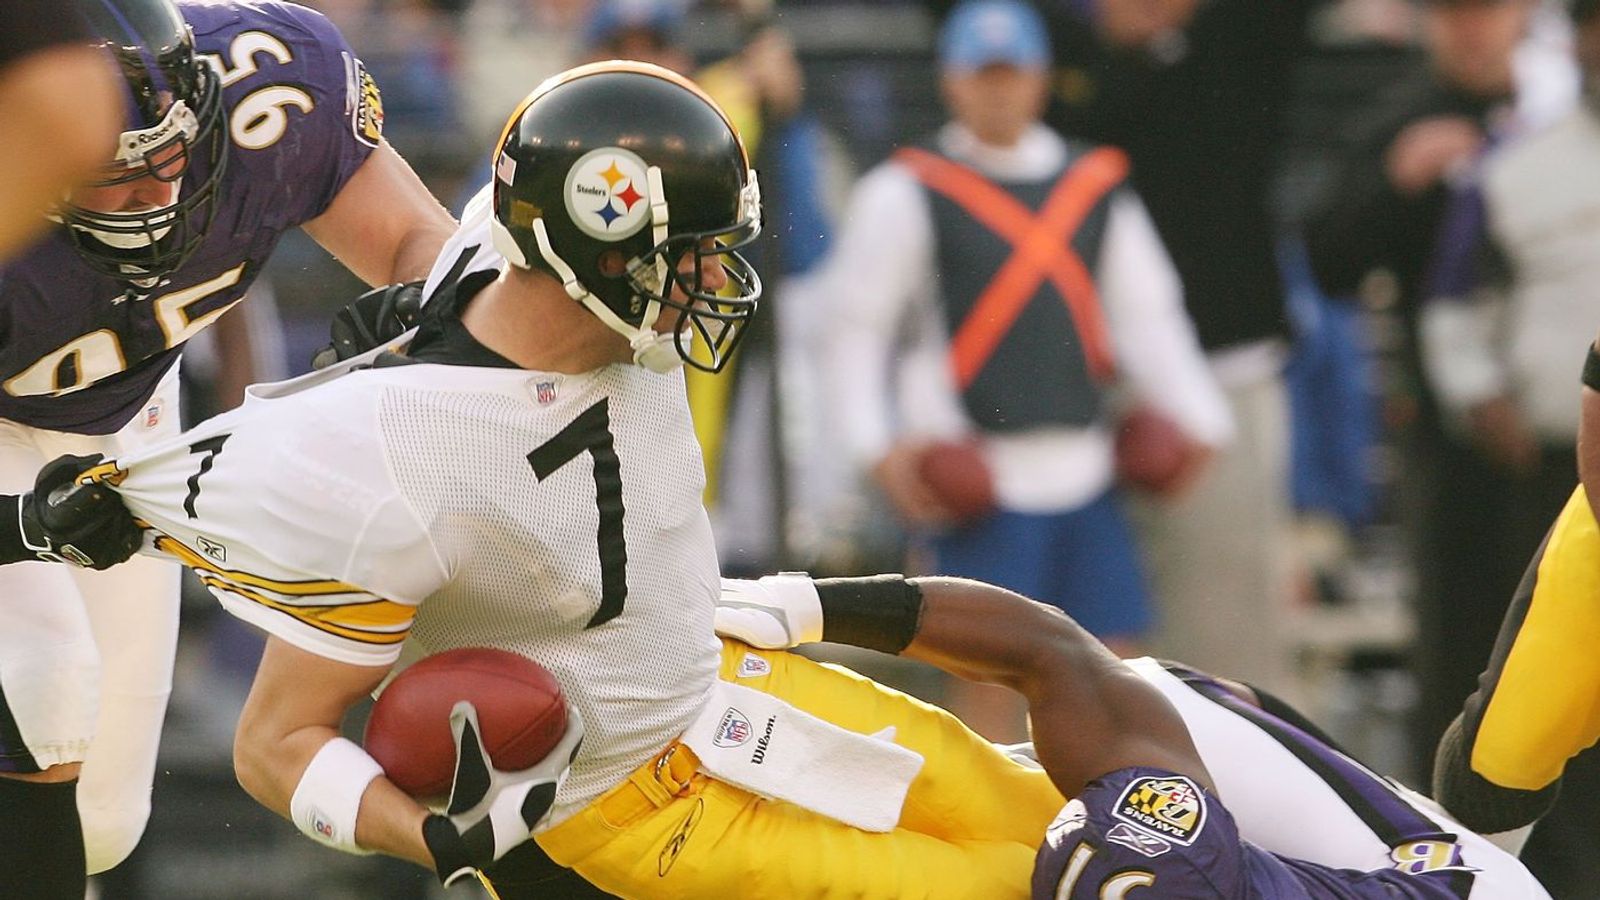 Steelers: Ben Roethlisberger says he's earned right to criticize team